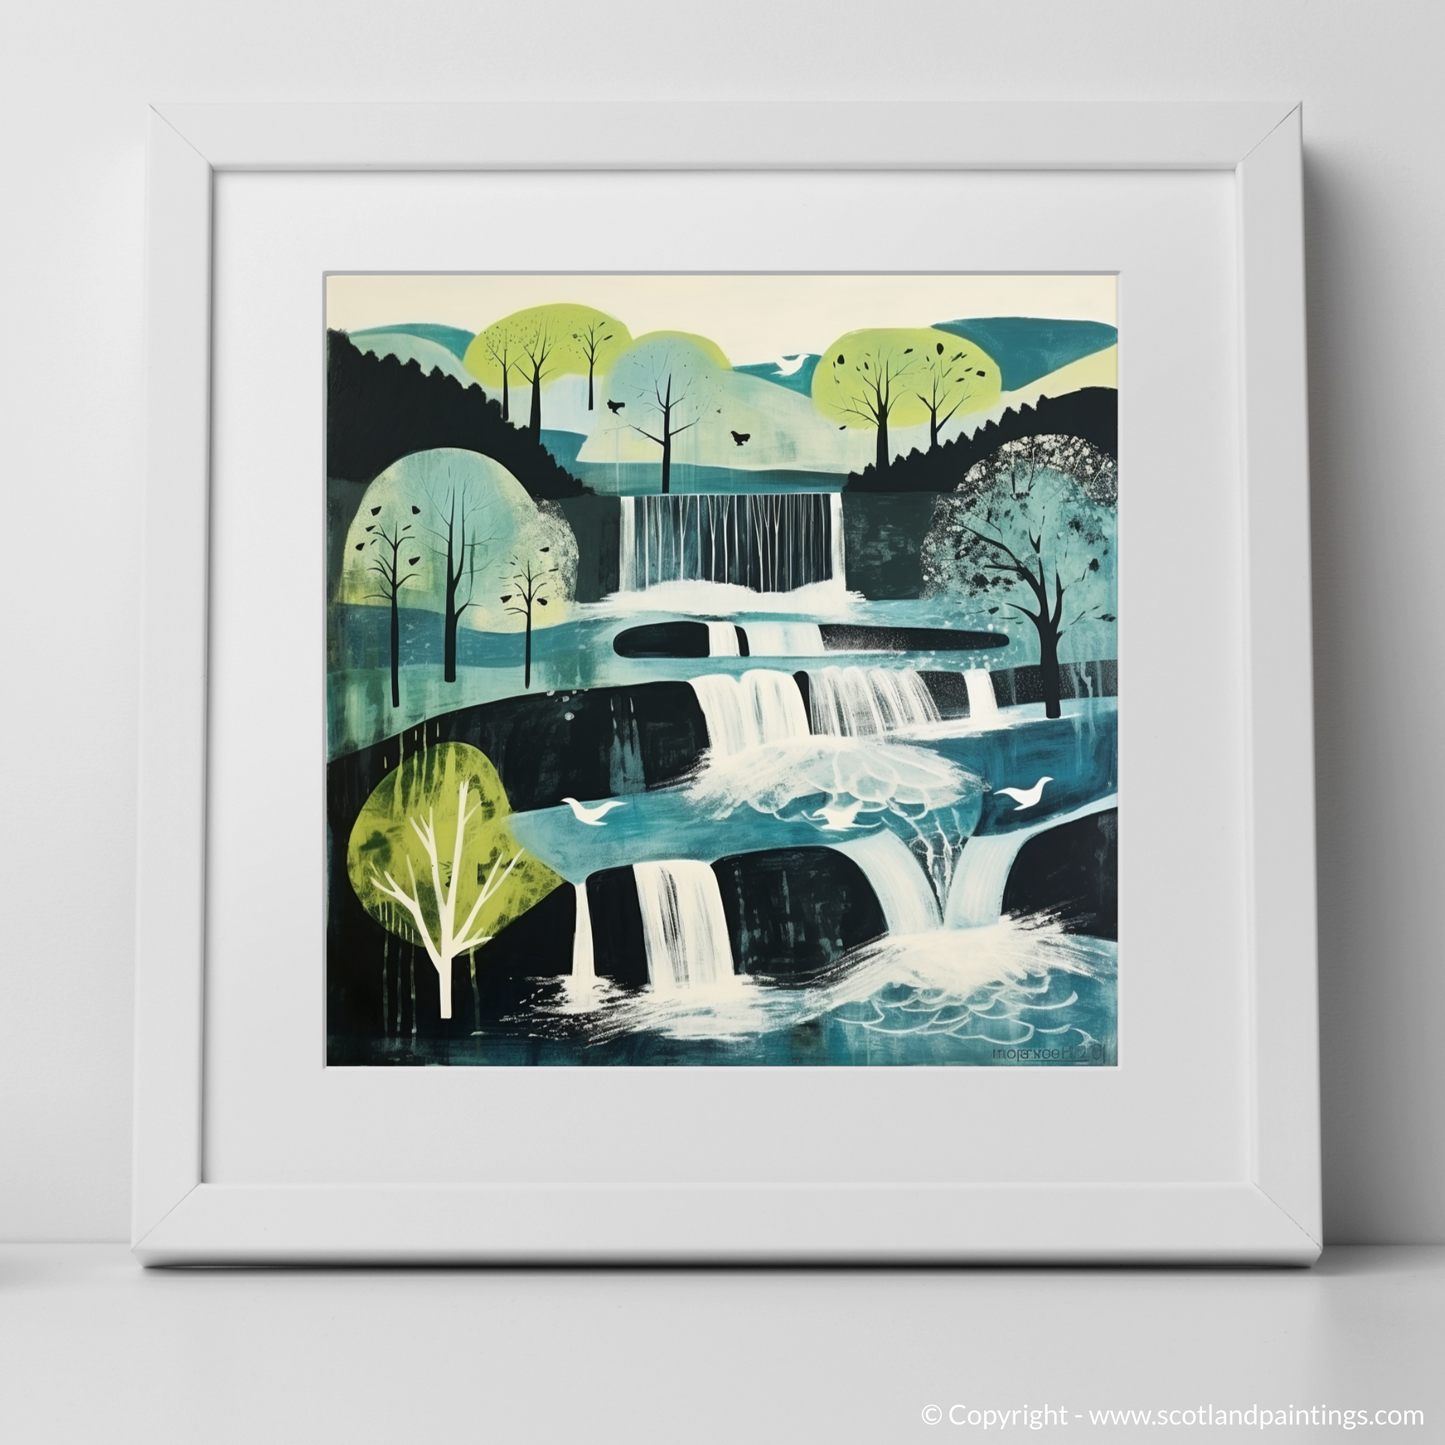 Enchanted Cascades of Tarf: A Naive Art Tribute to Perthshire's Waterfall Wonderland